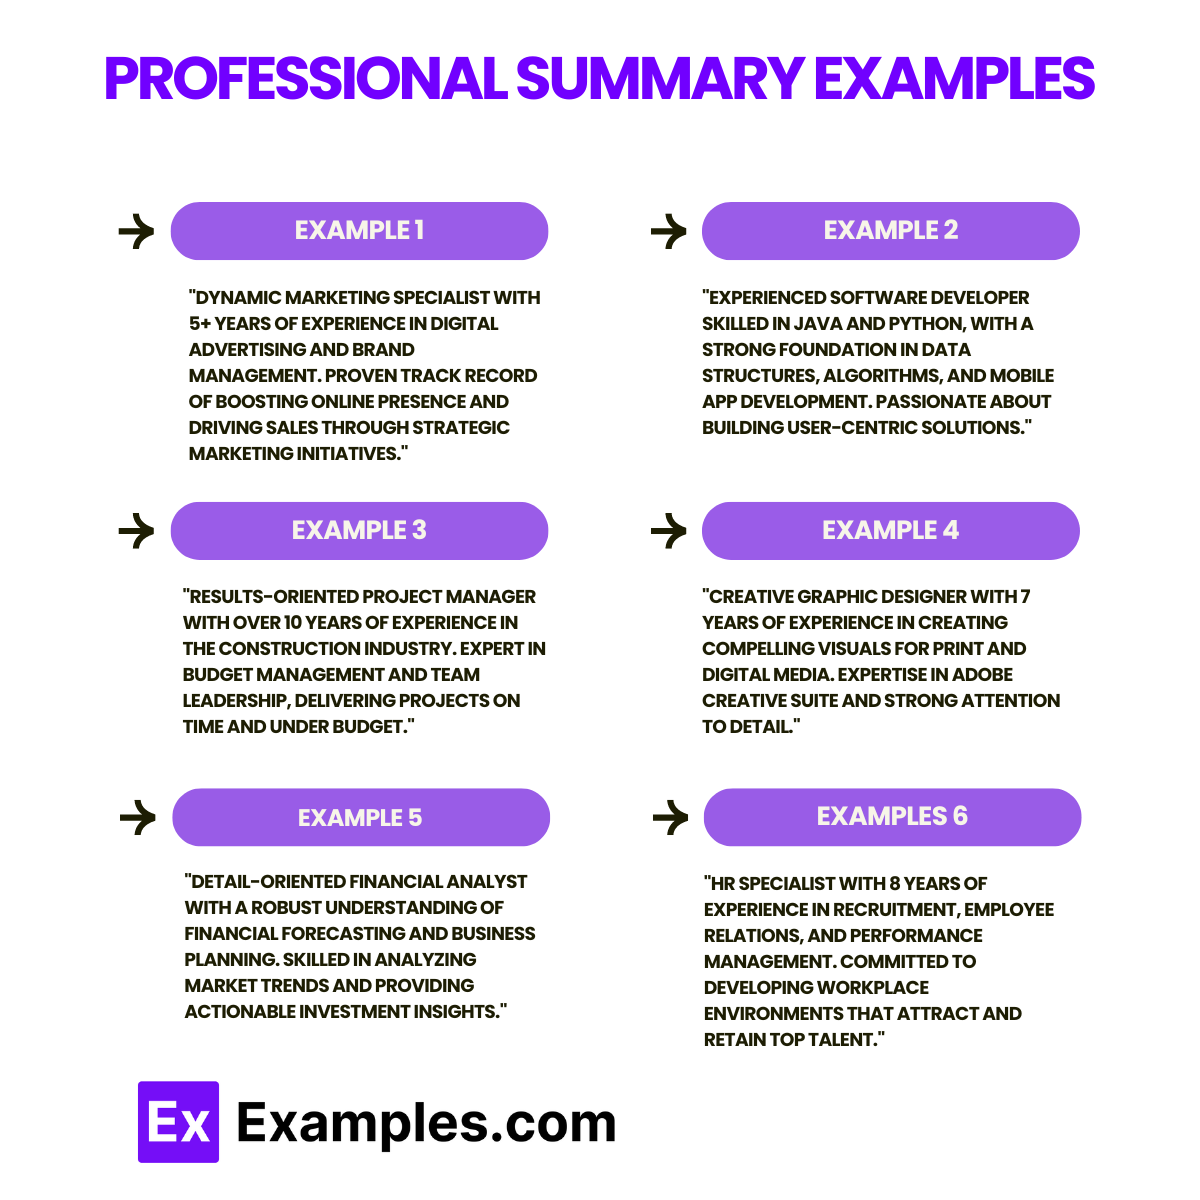 Professional Summary Examples